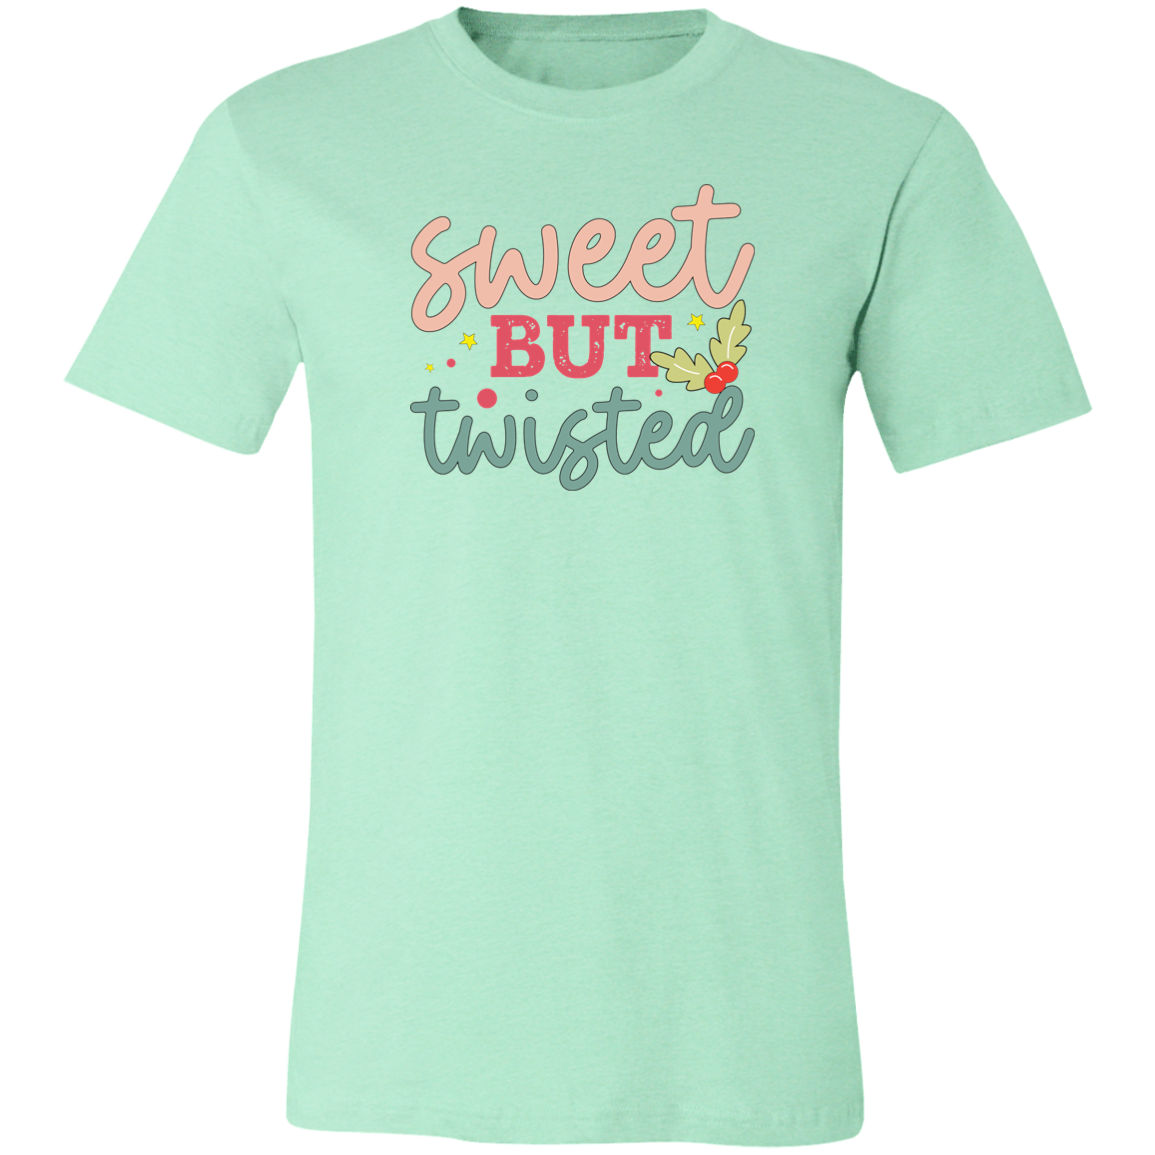 Sweet But Twisted Shirt